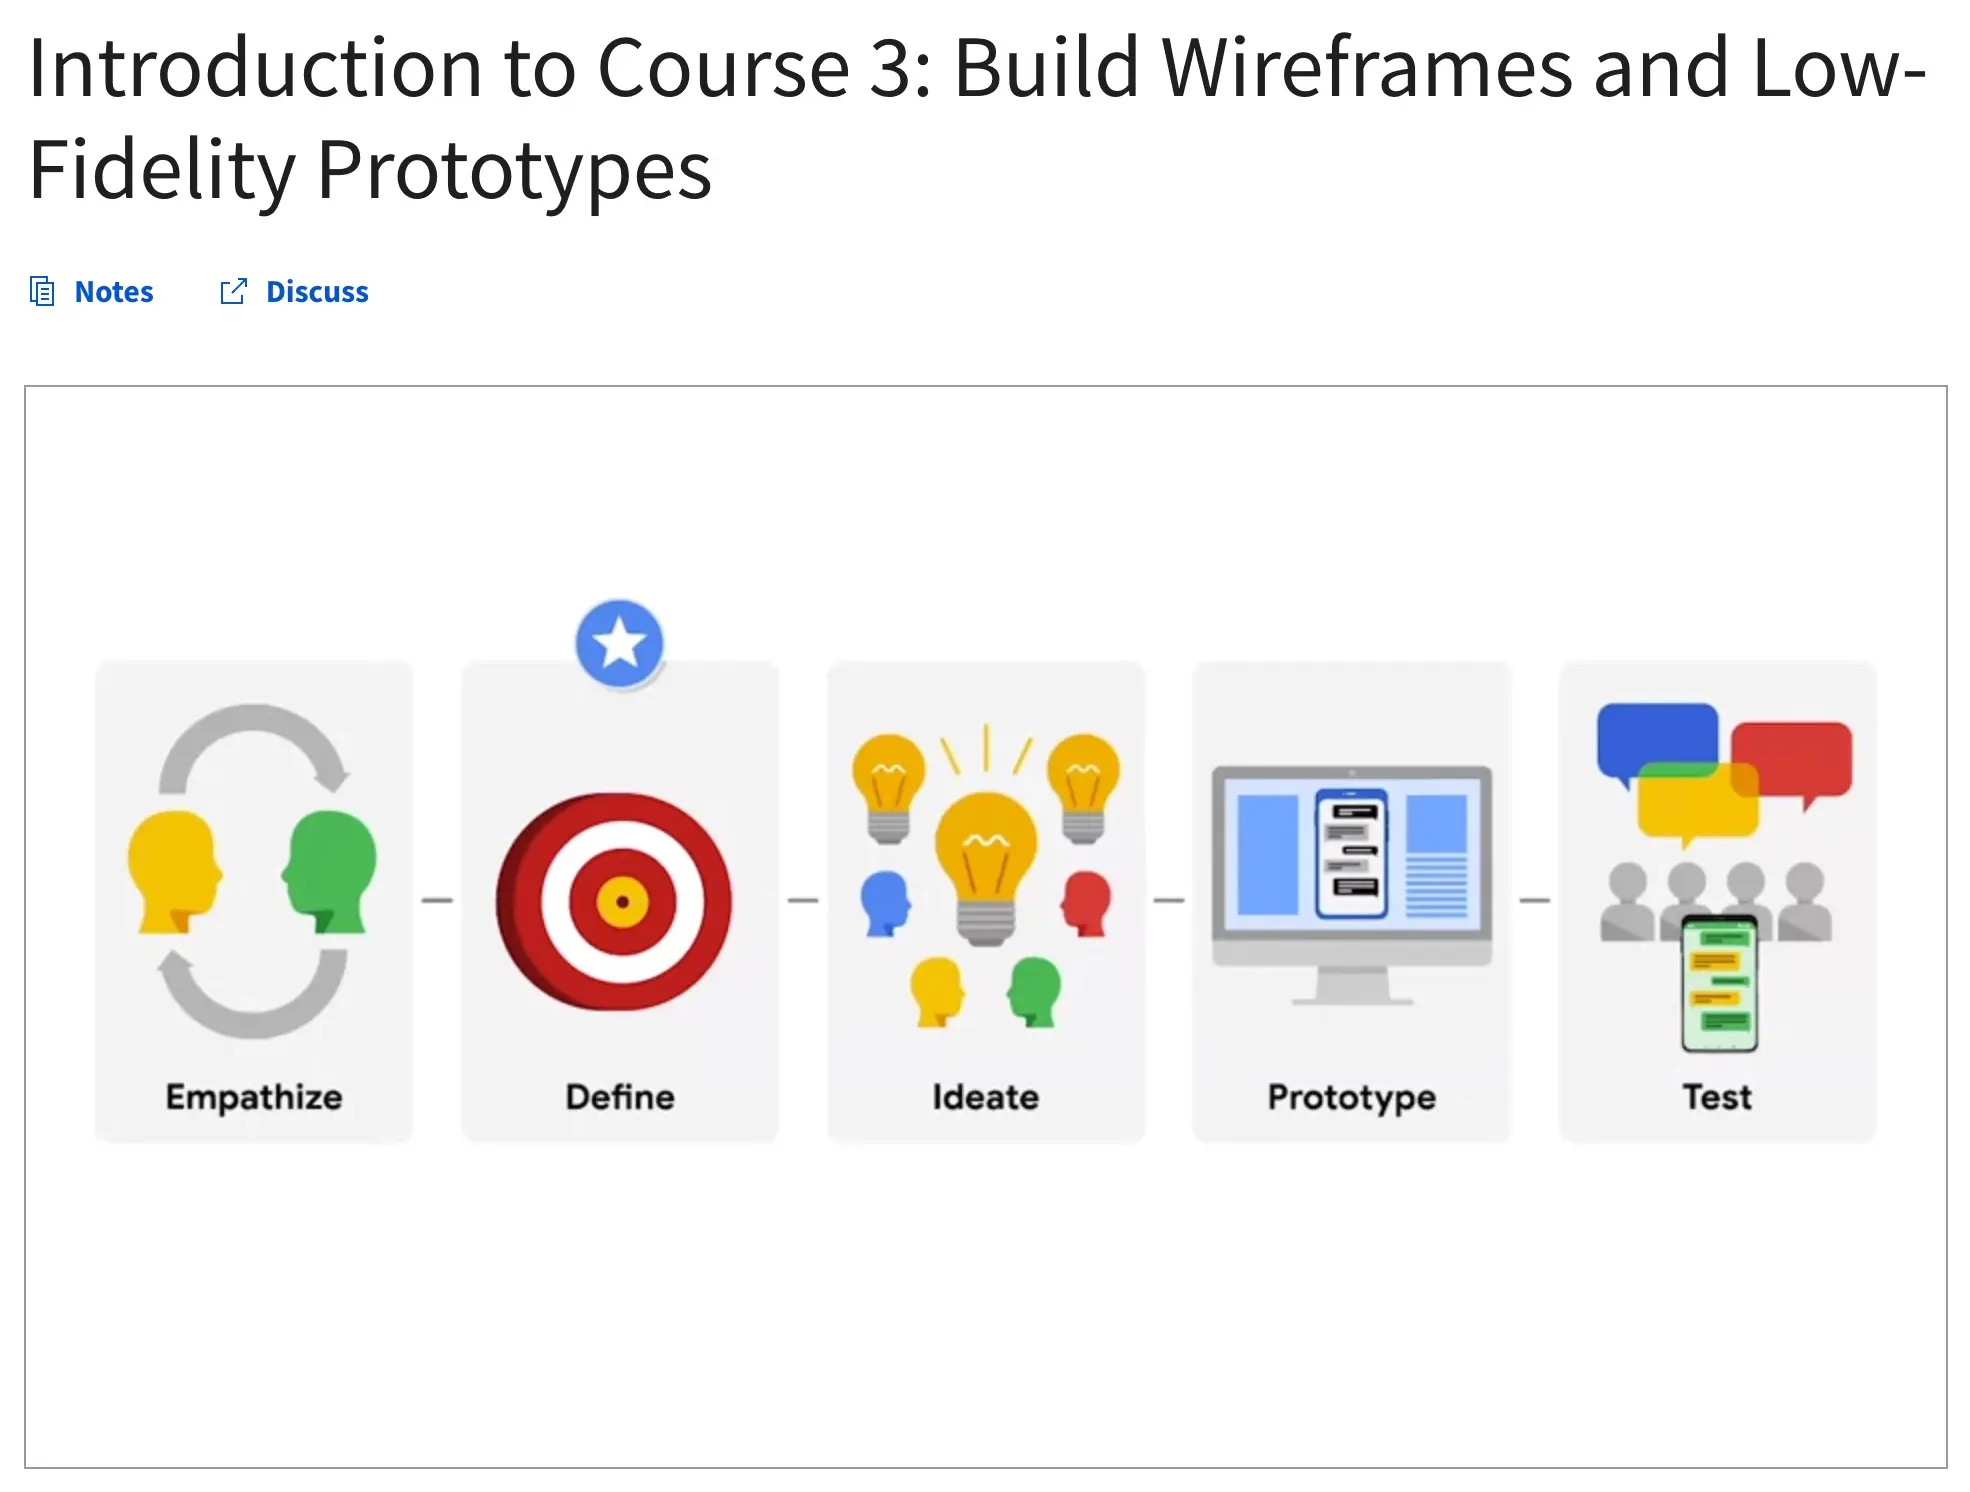 Build Wireframes and Low-Fidelity Prototypes Course.